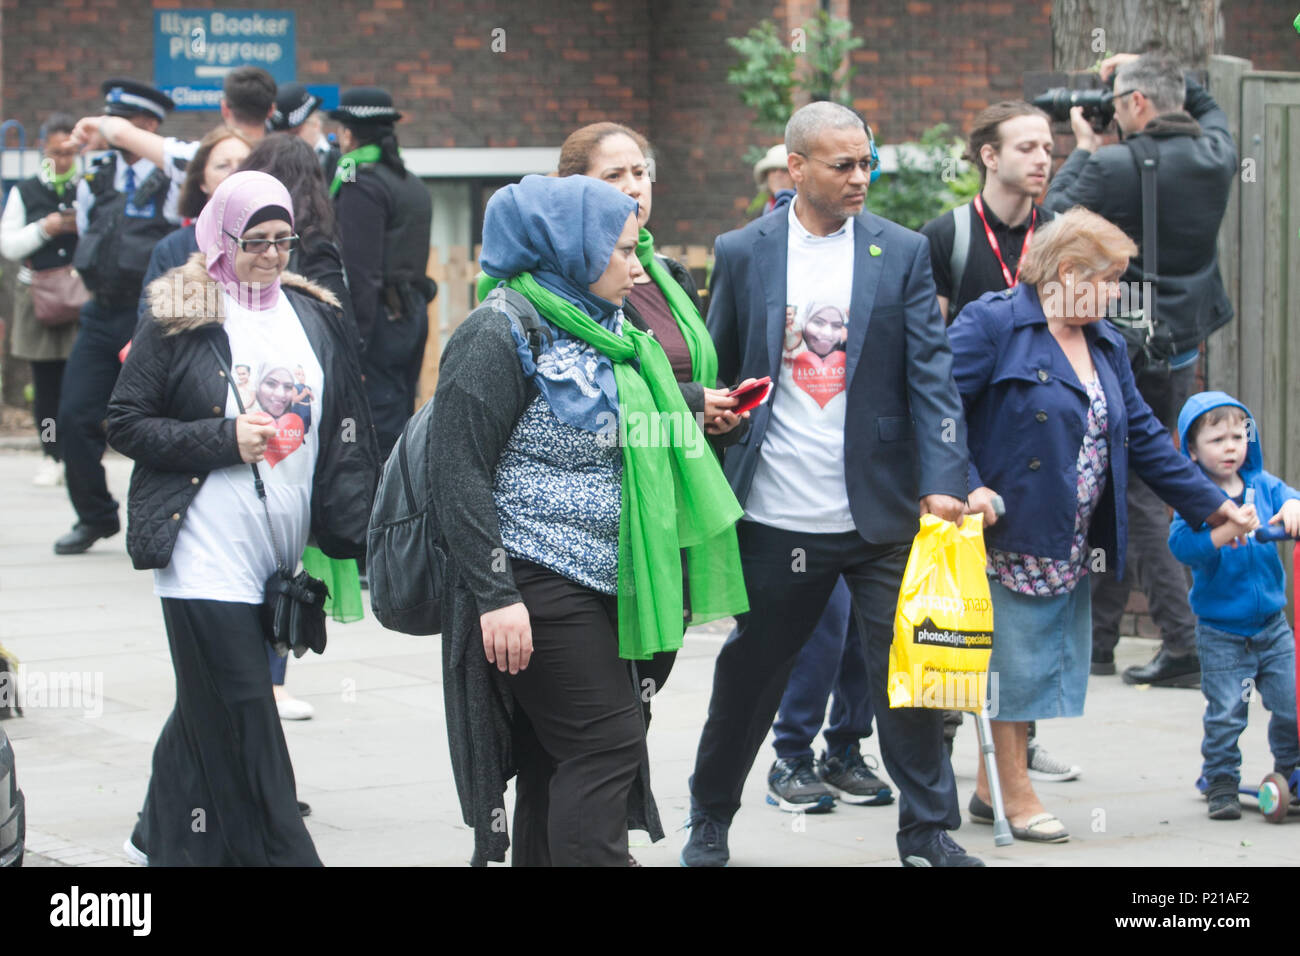 London UK. 14th June 2018. Members of the public wearig green scarves to mark the Grenfell anniversary a year after the fire  in West London which claimed the lives of 72 residents in the tower block.  A minute's silence will be observed nationally at midday to remember the victims of the Grenfell fire on 14 June 2017. Credit: amer ghazzal/Alamy Live News Stock Photo